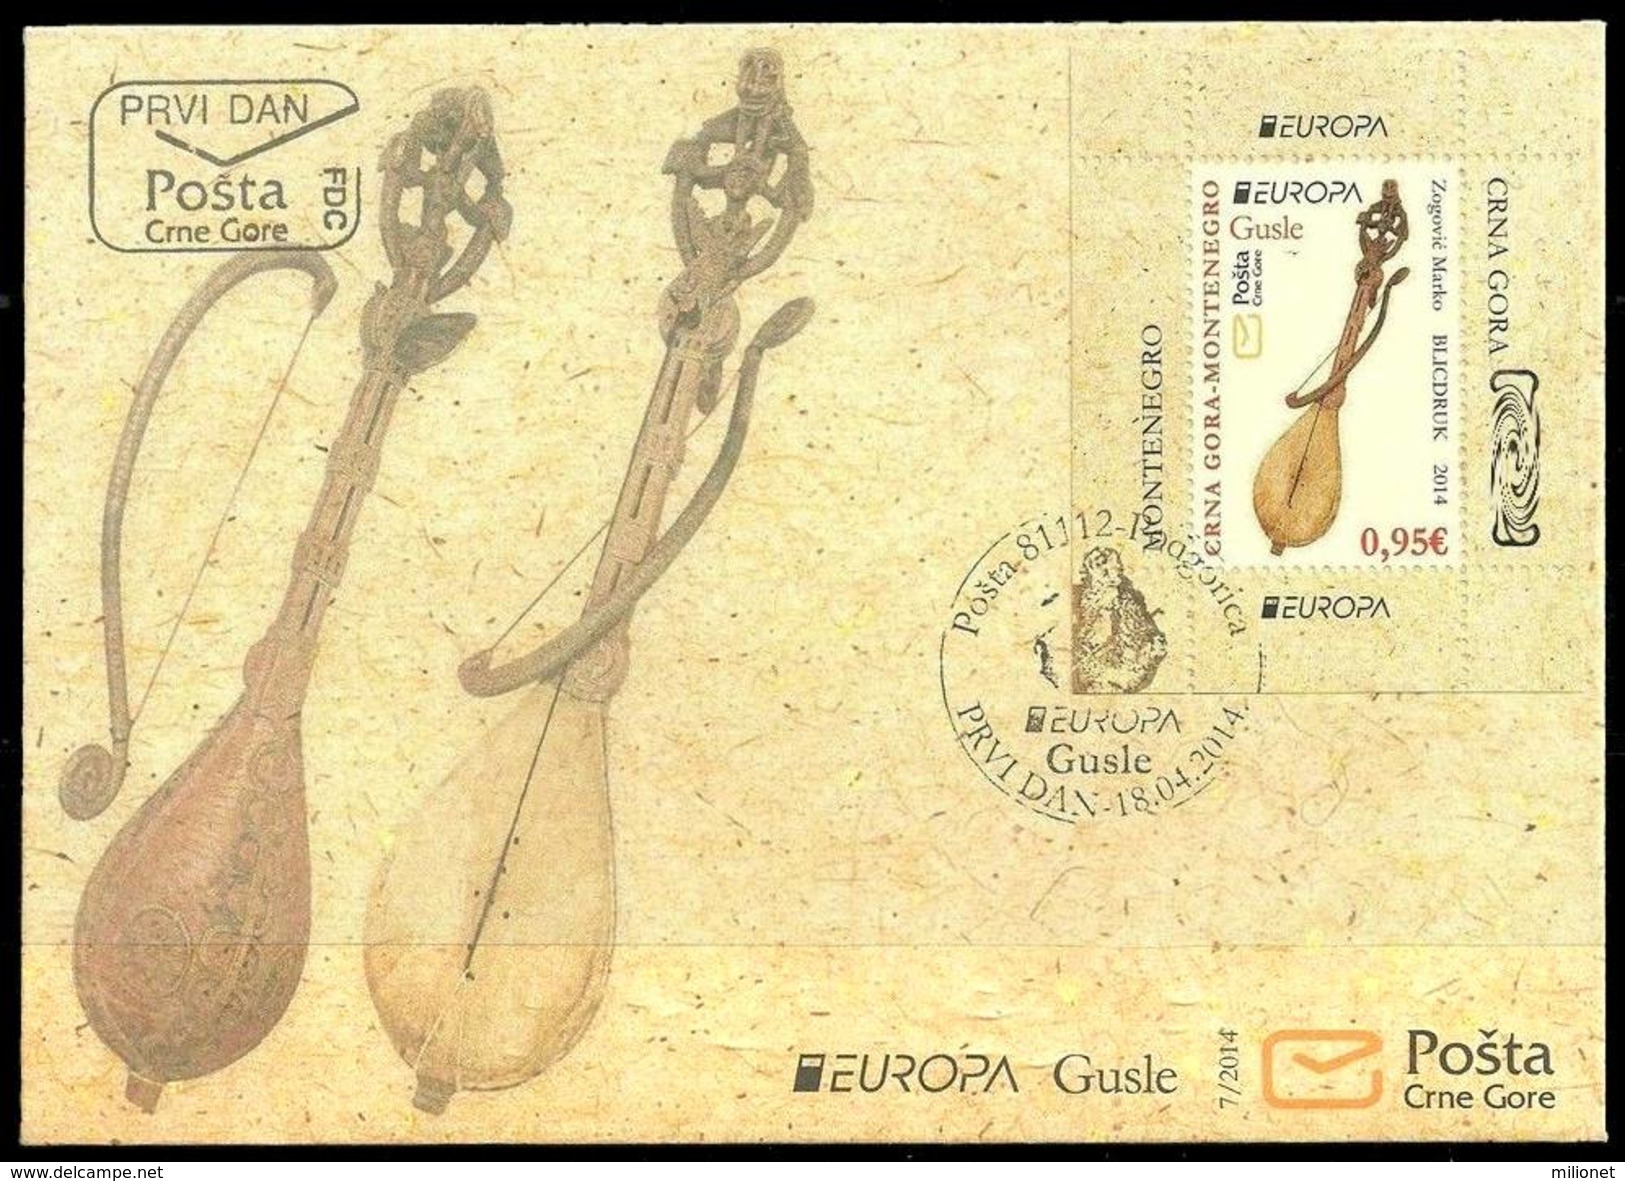 SALE!!! MONTENEGRO CNRA GORA 2014 EUROPA CEPT MUSIC INSTRUMENTS - FDC First Day Cover Of The S/S - 2014